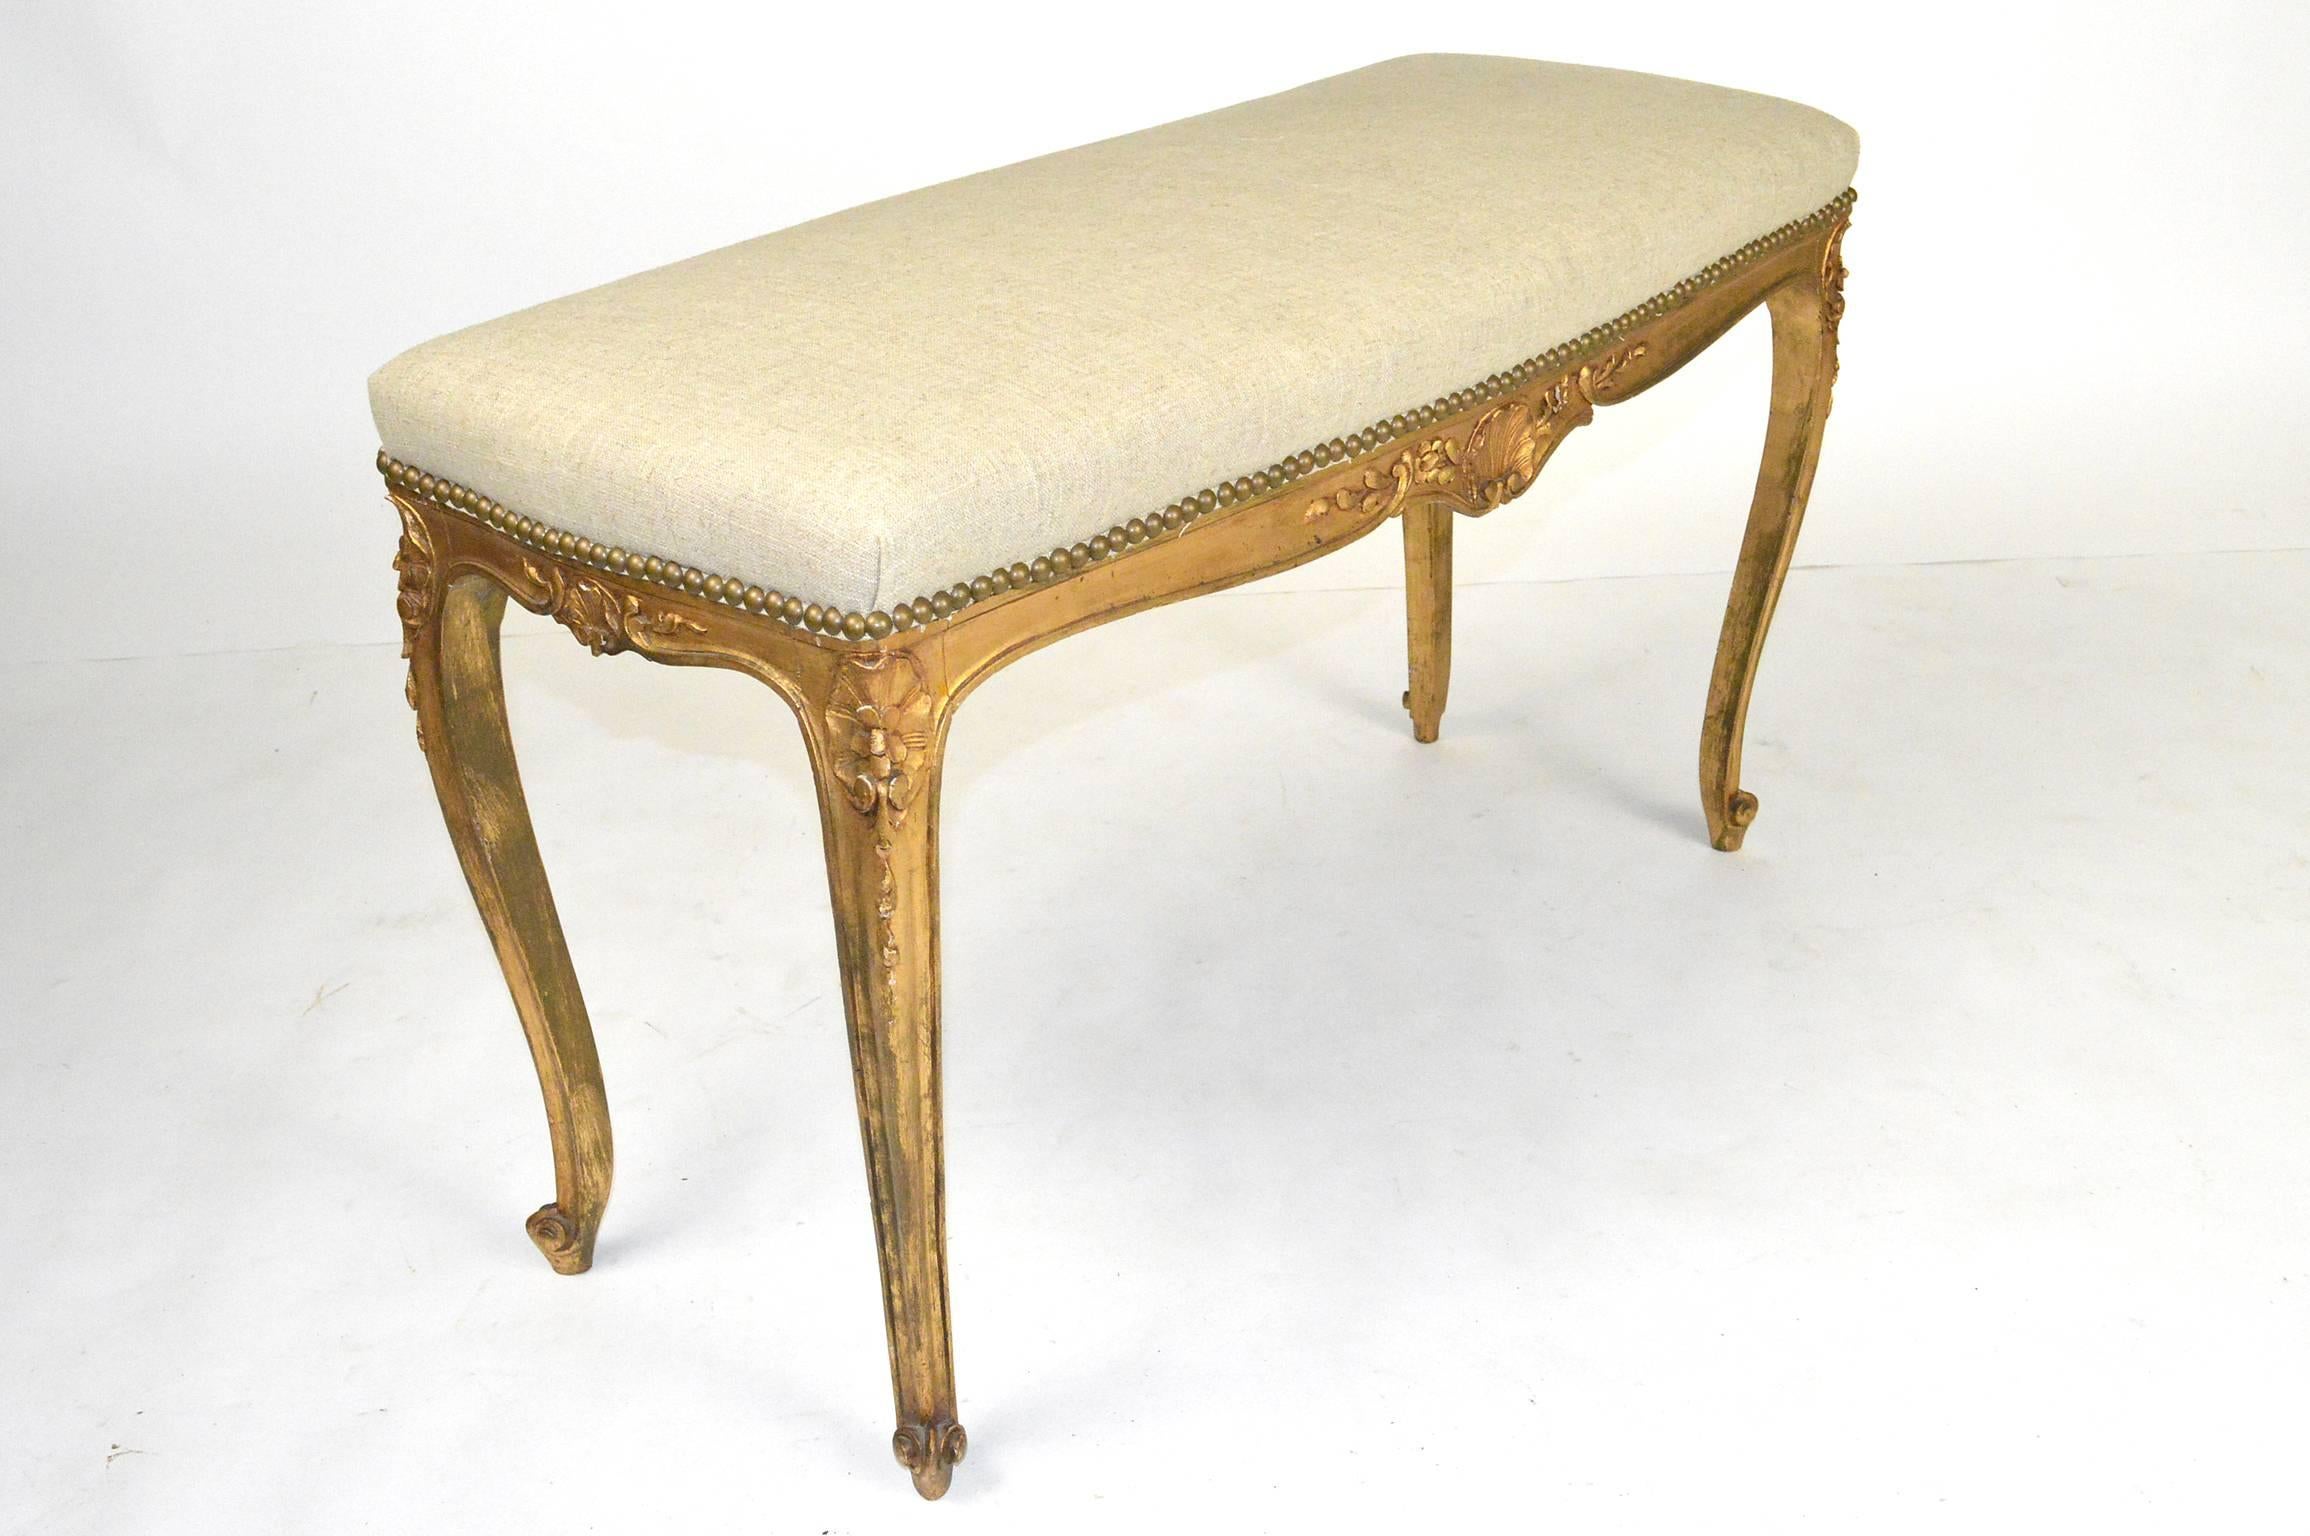 French Louis XVI style carved and giltwood bench covered in linen upholstery with nailhead trim.